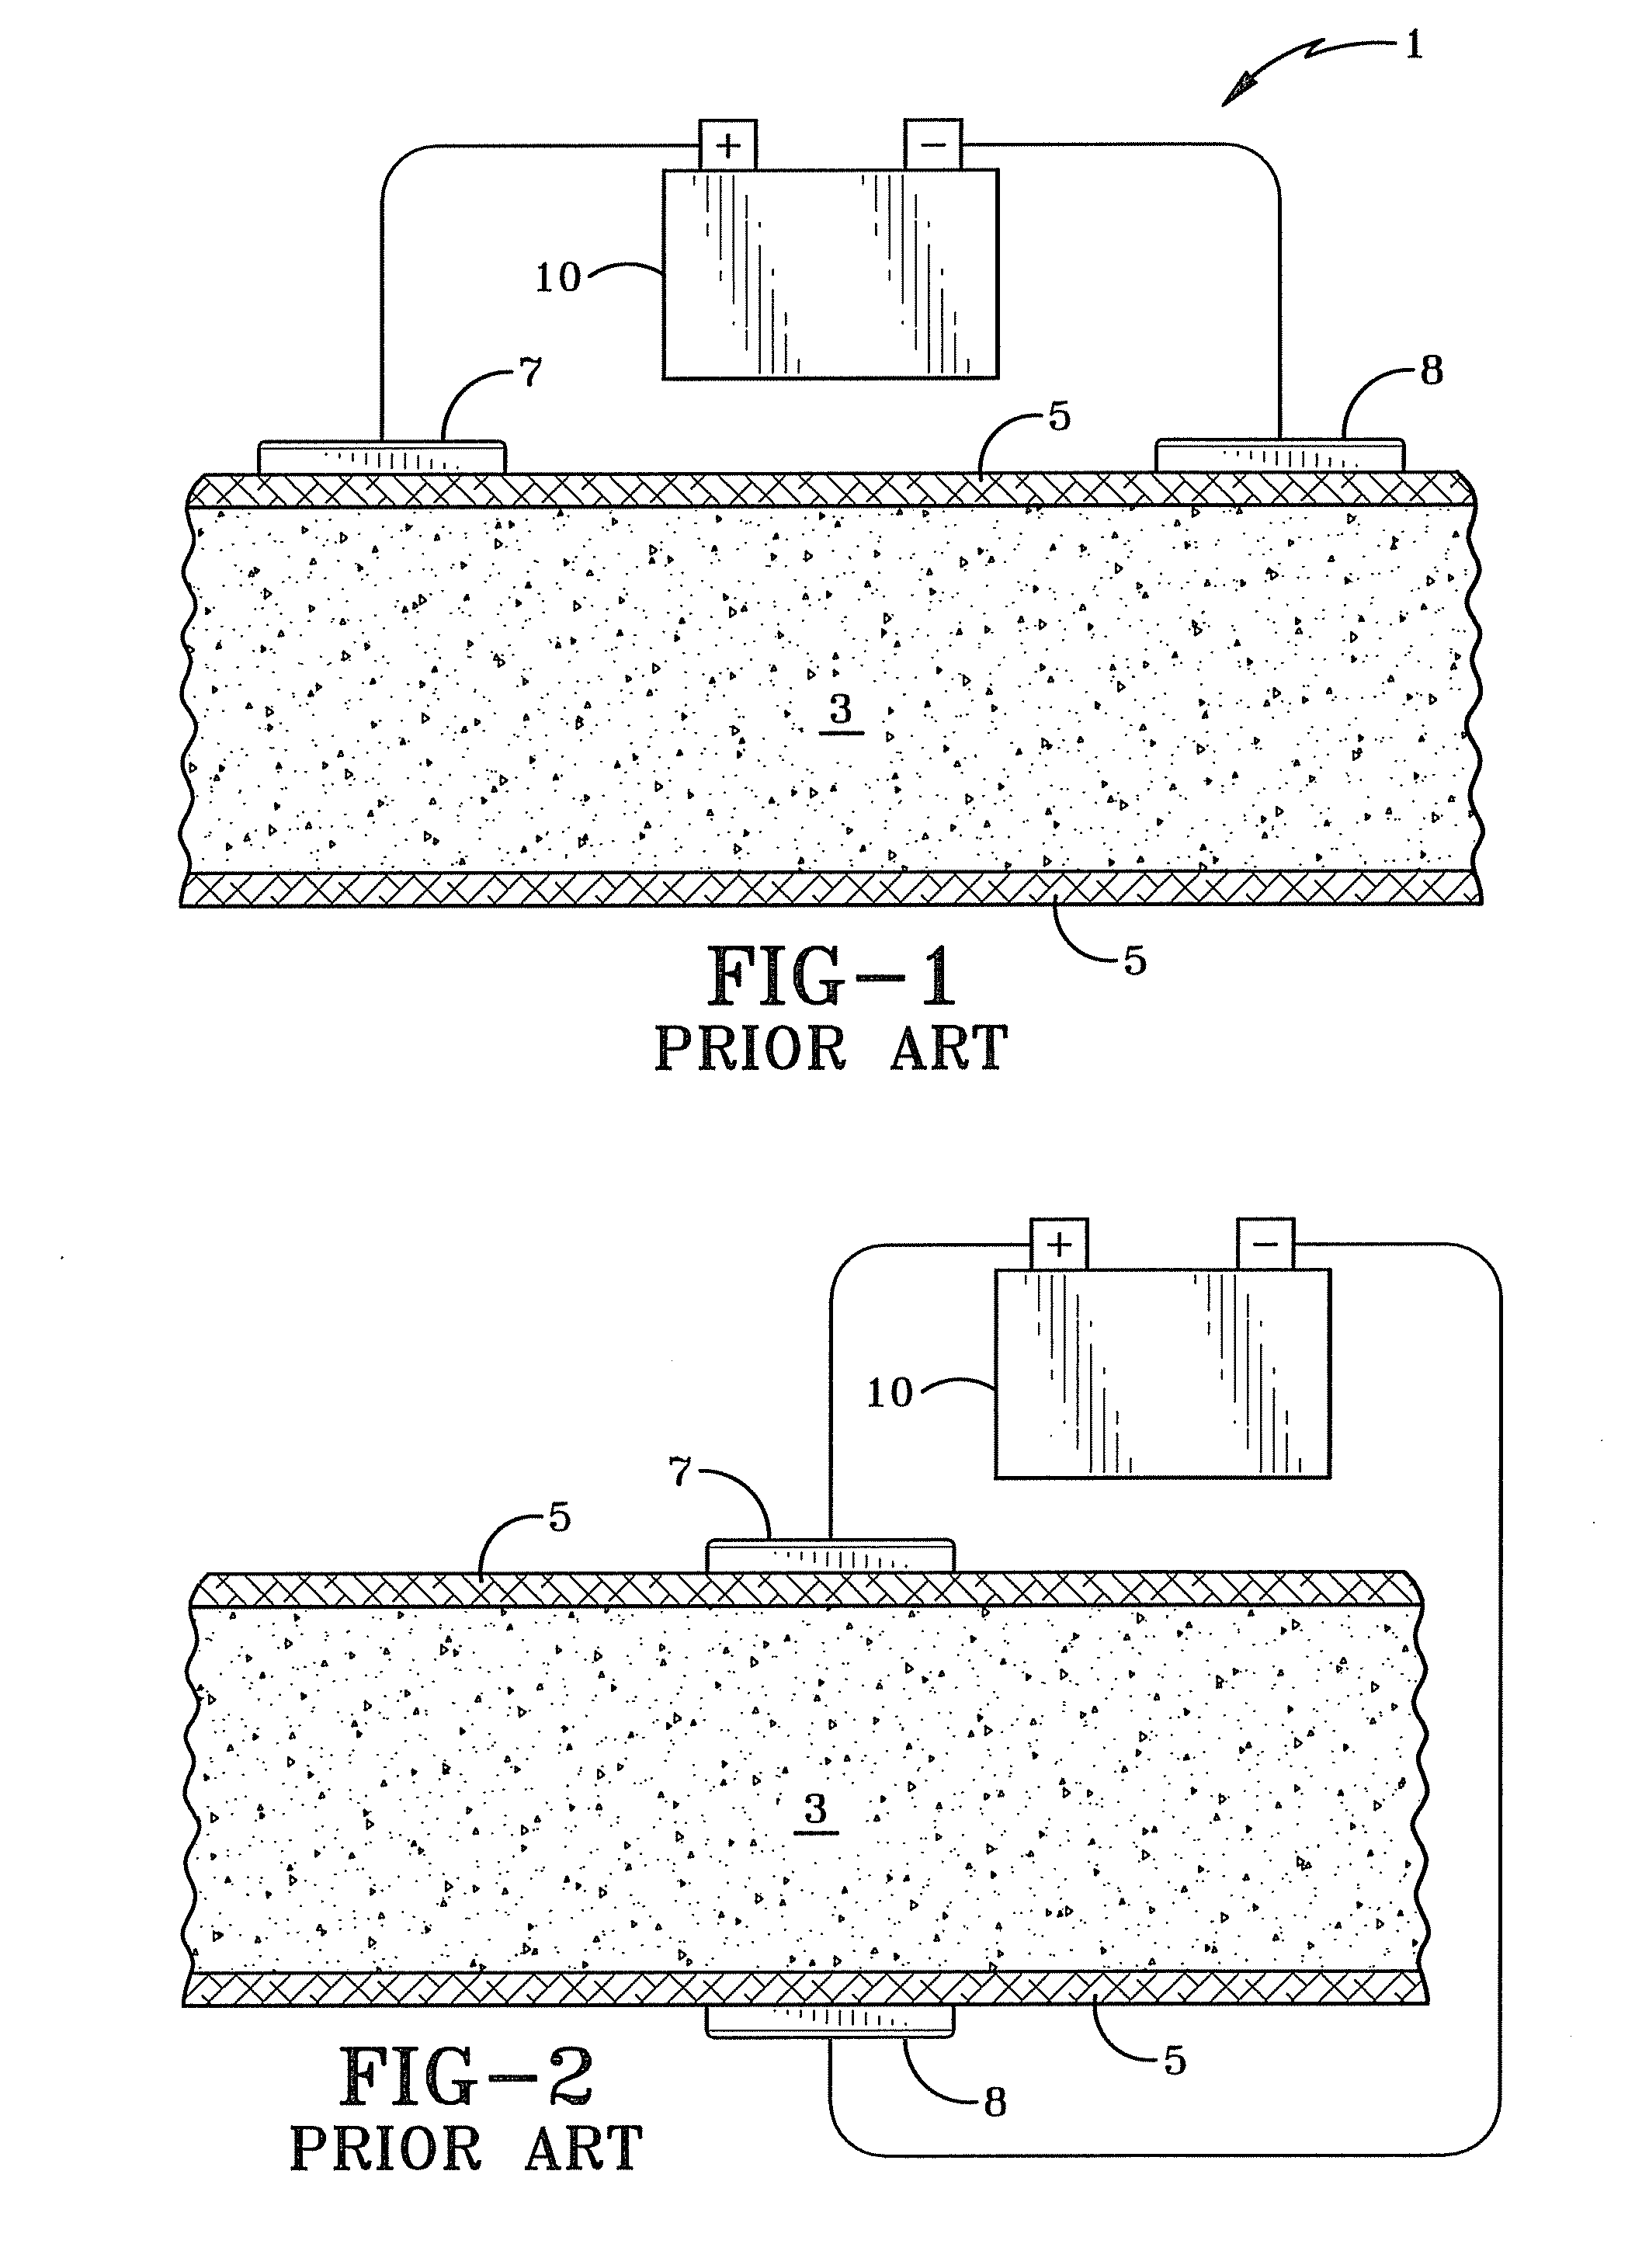 Iontophoretic delivery system